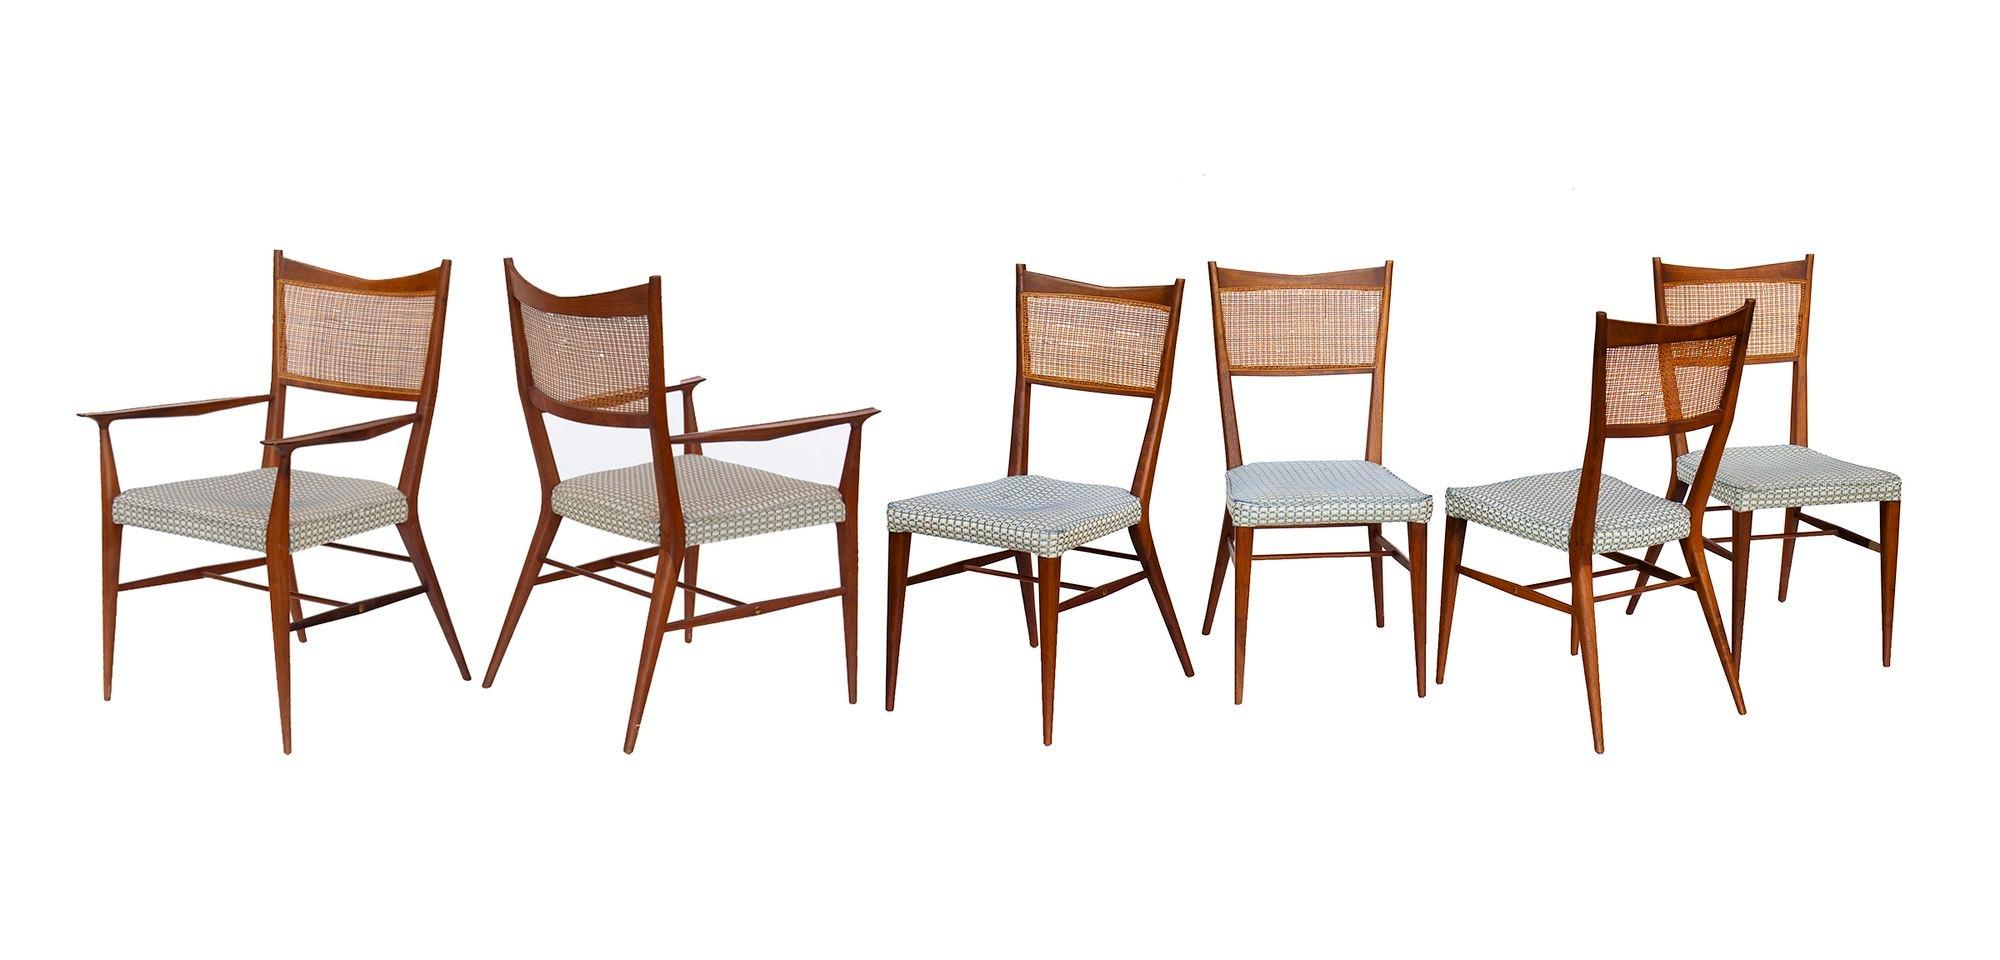 USA, 1950s
Set of Paul McCobb for Calvin Walnut Dining Chairs with Caned Backs. Set includes two armchairs and four side chairs, all with their original fabric seats in a dimensional blue tweed. Elegant, airy, beautifully crafted chairs in very